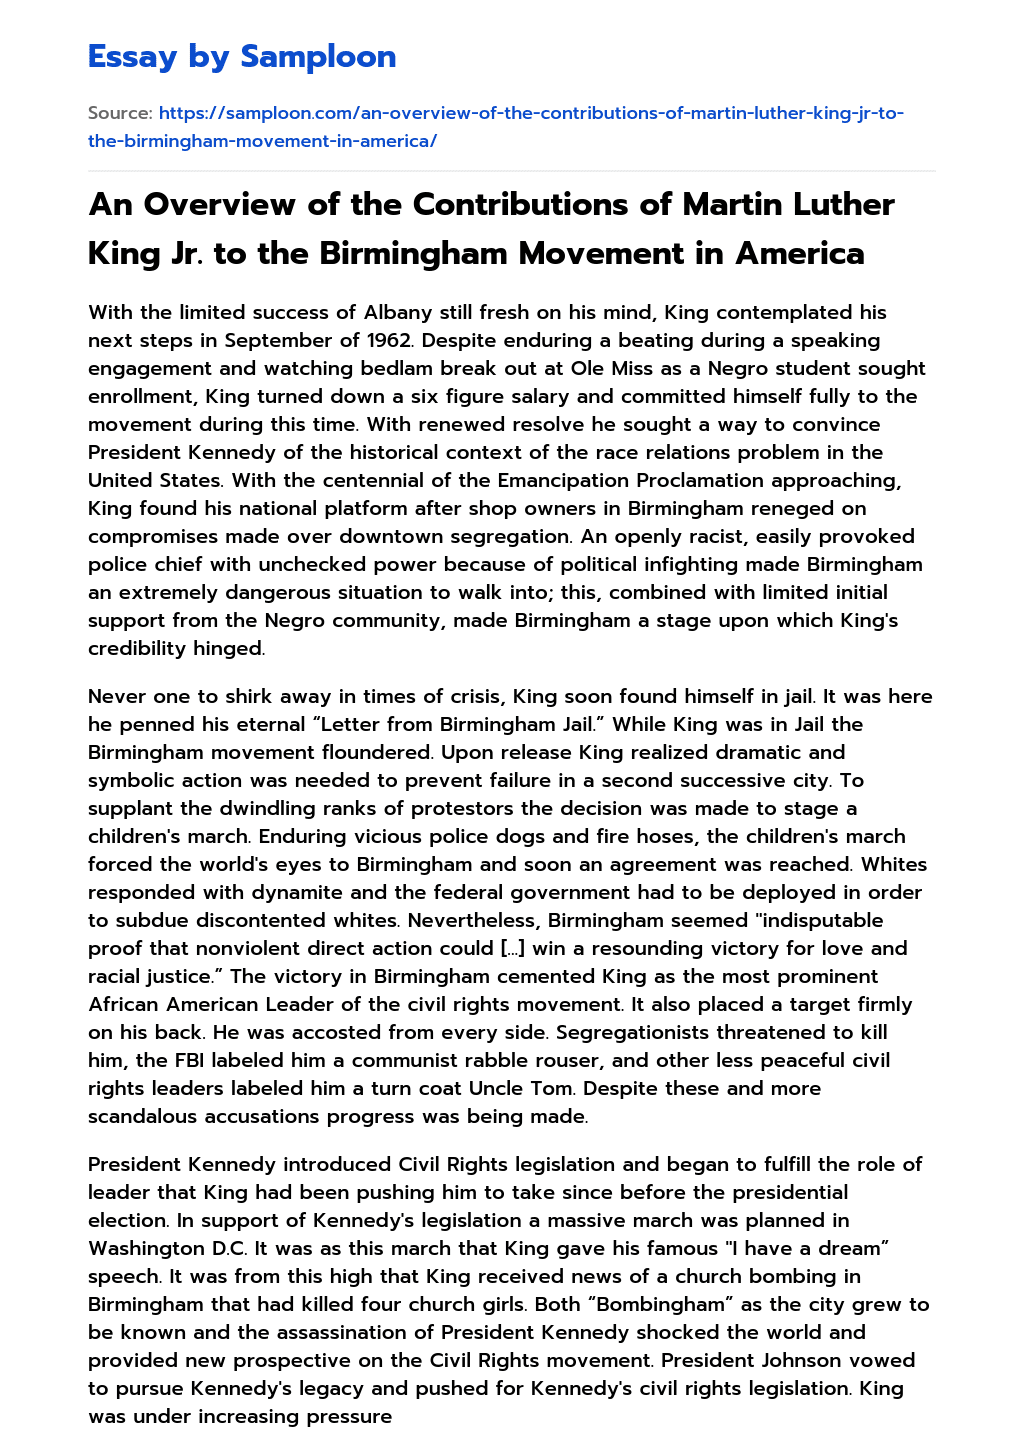 An Overview of the Contributions of Martin Luther King Jr. to the Birmingham Movement in America essay